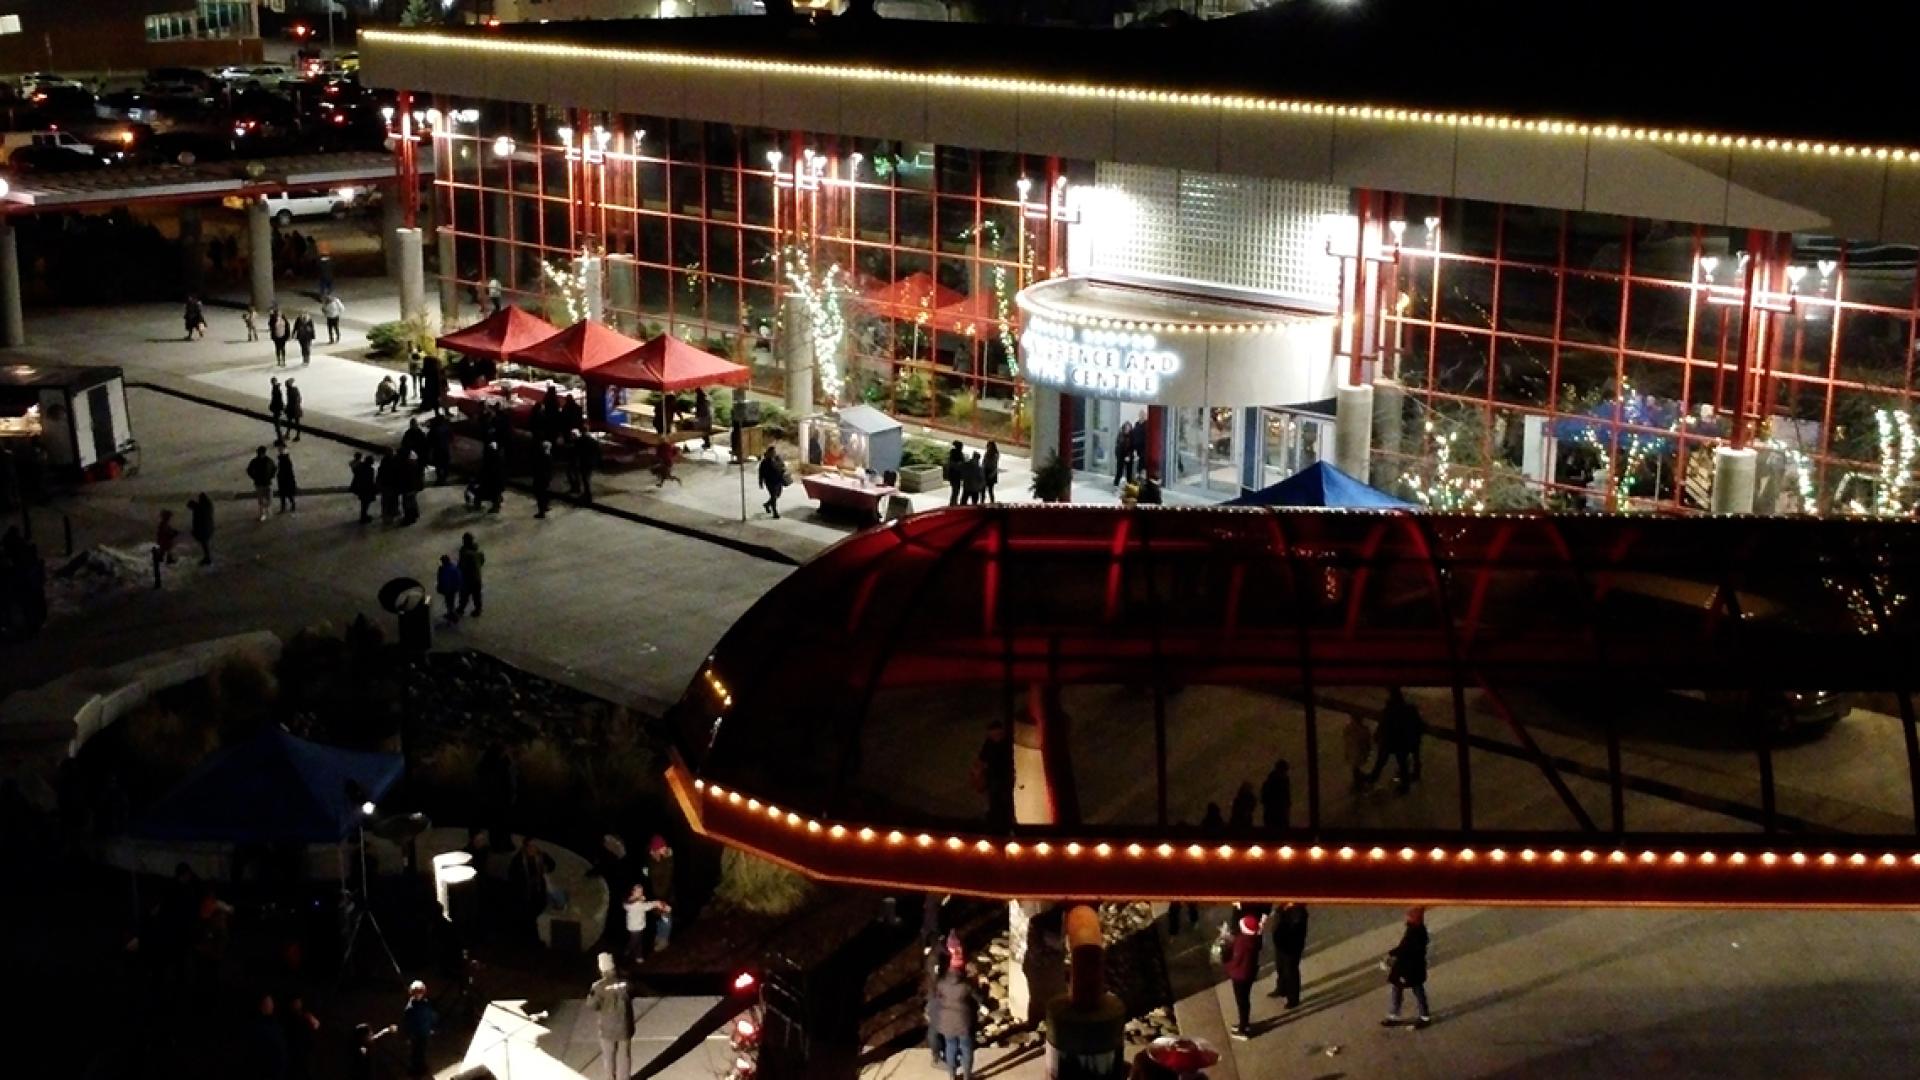 Aerial view of Canada Games Plaza in at night, with crowd and holiday lights.